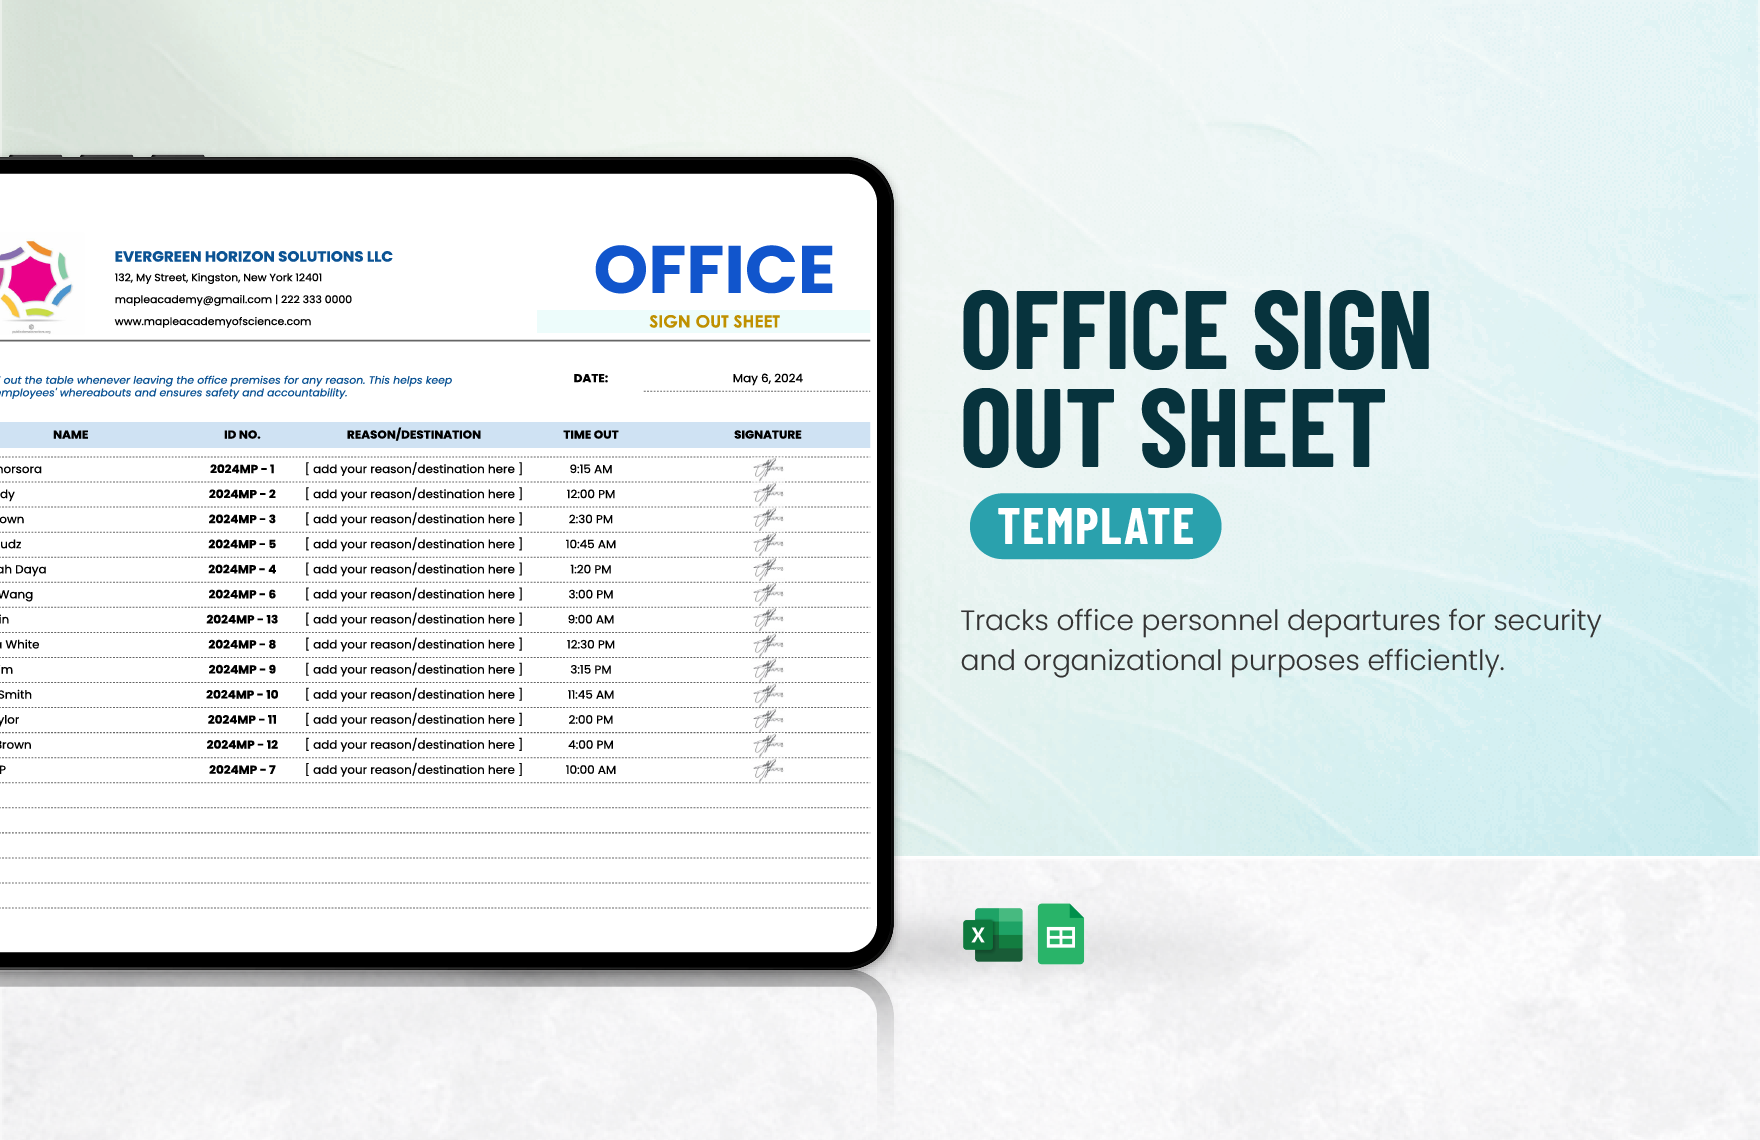 Office Sign Out Sheet Template in Excel, Google Sheets